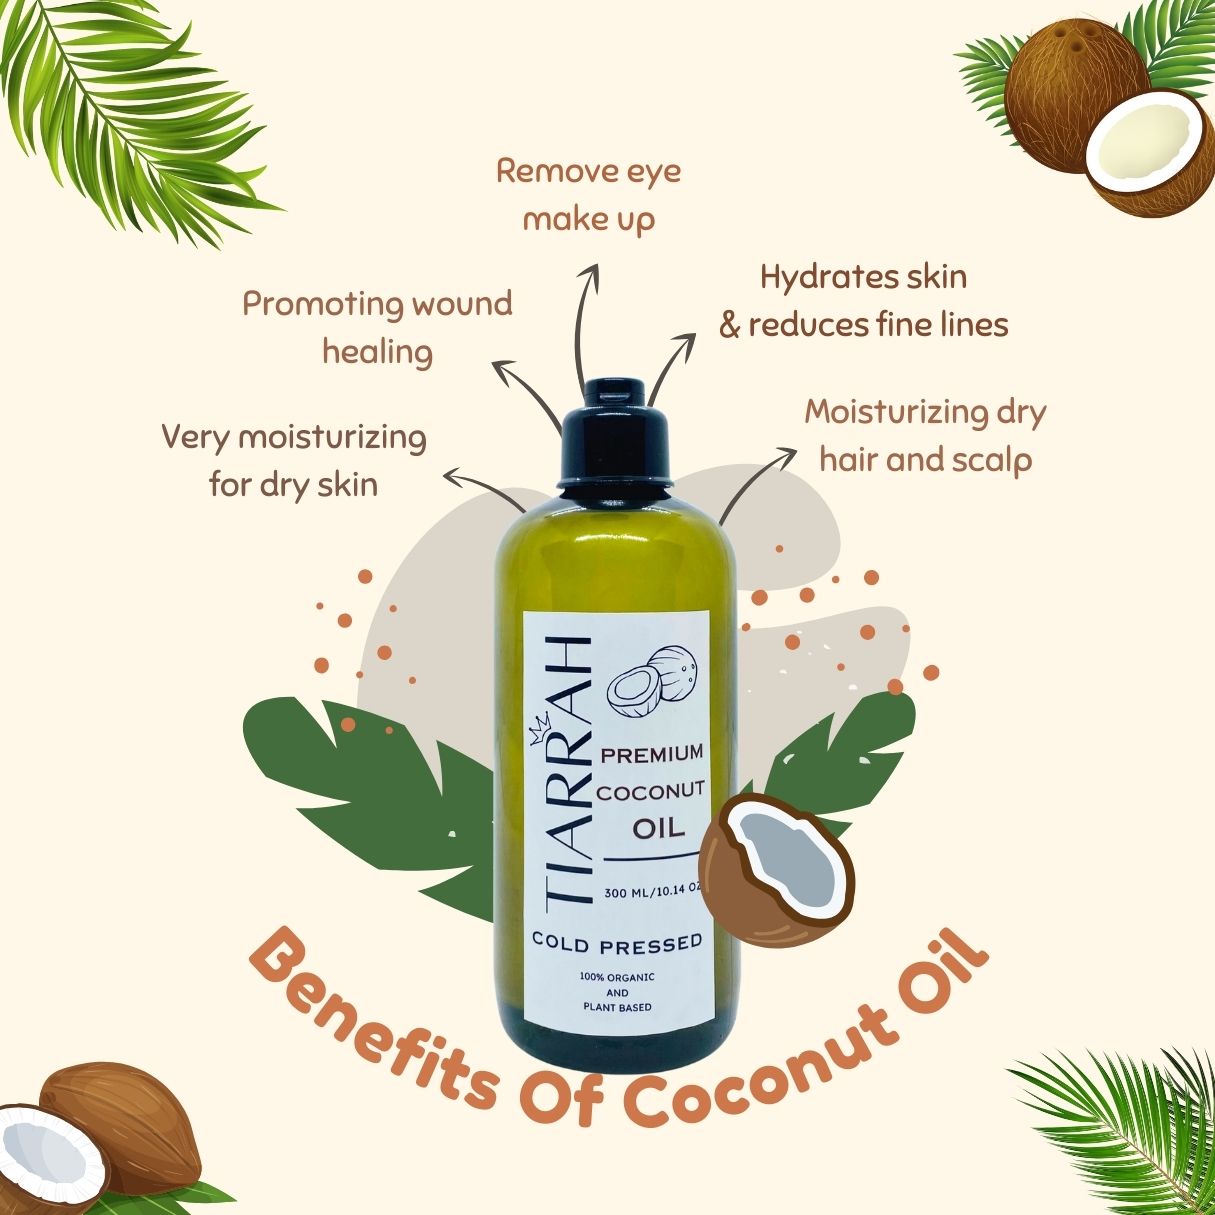 Tiarrah's Coconut Oil: Natural & Non-Toxic - The Luxury Bath and Body Care Shop